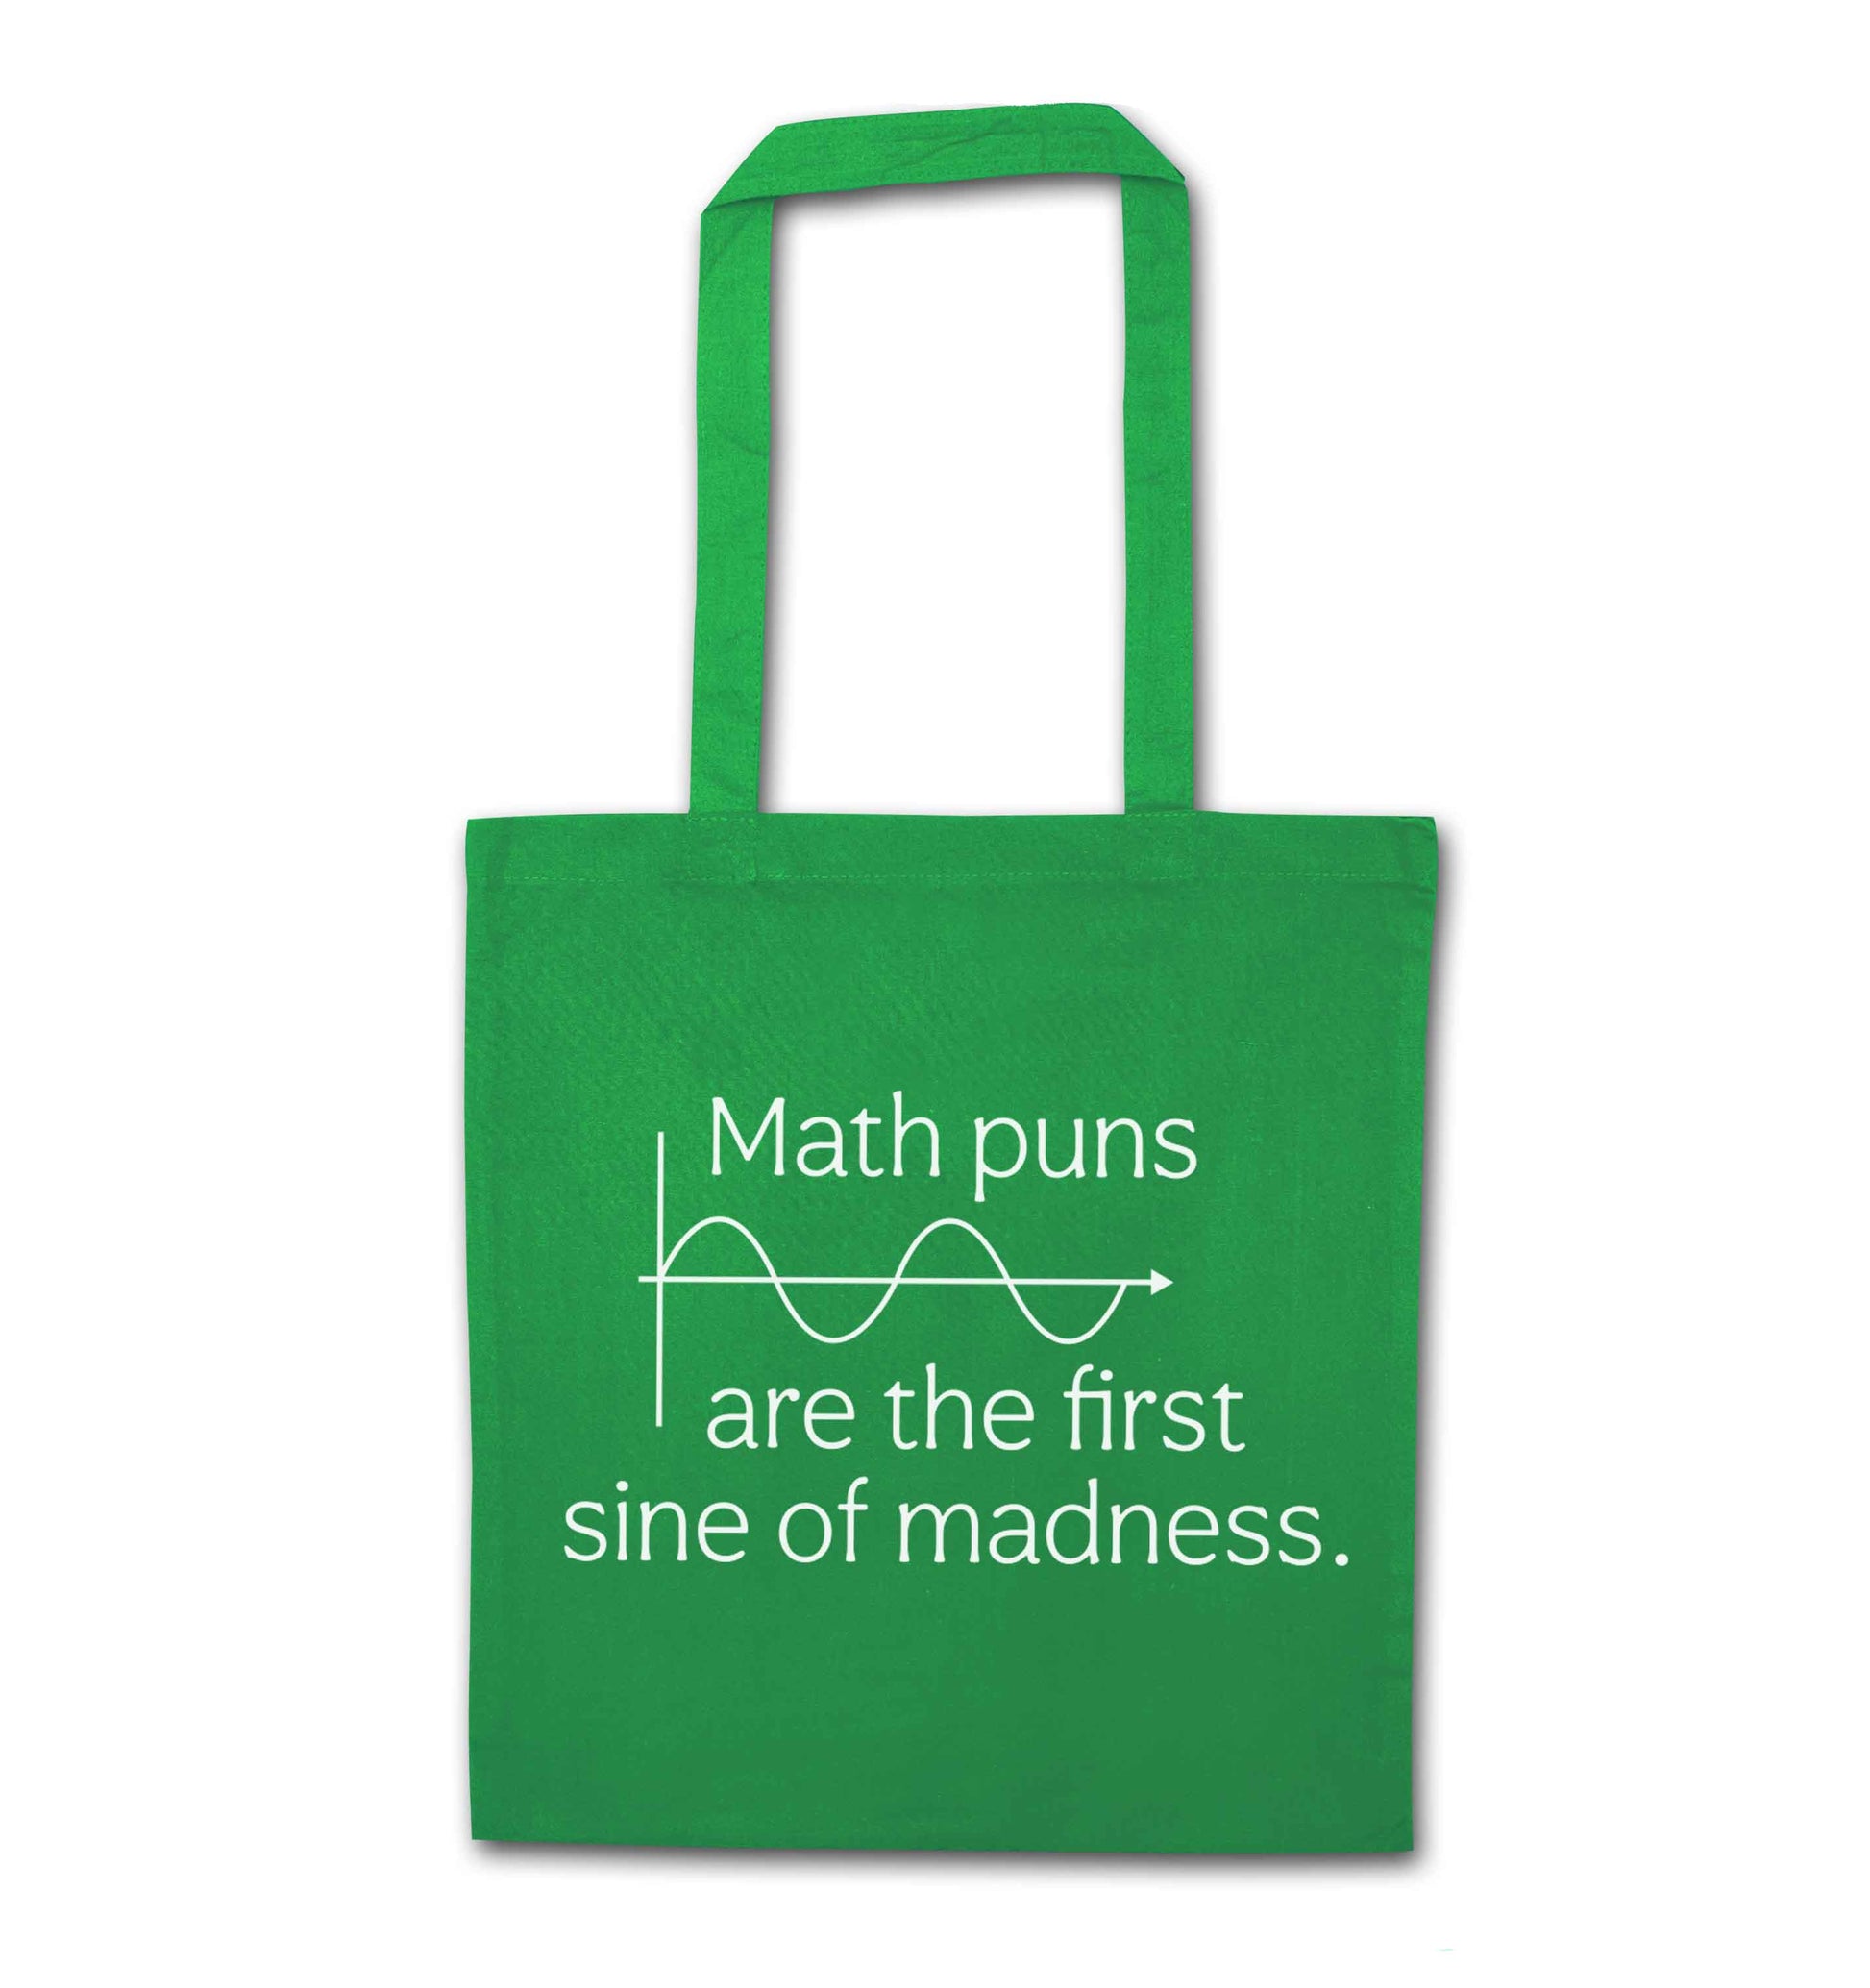 Math puns are the first sine of madness green tote bag